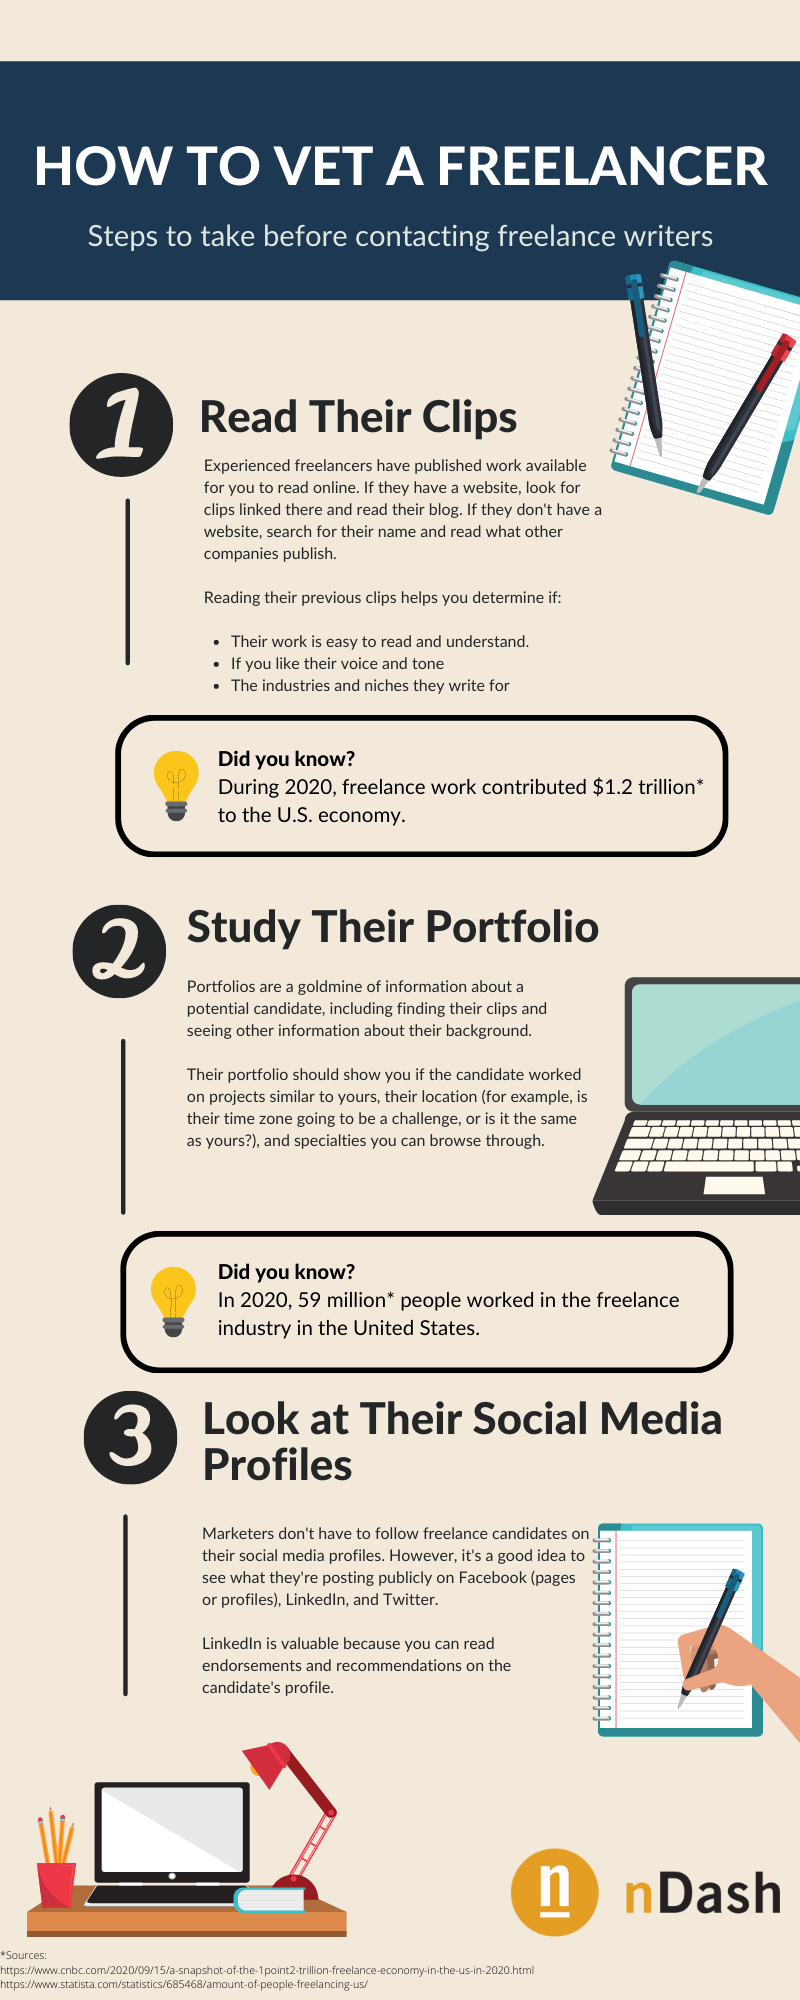 How to Vet a Freelancer Infographic